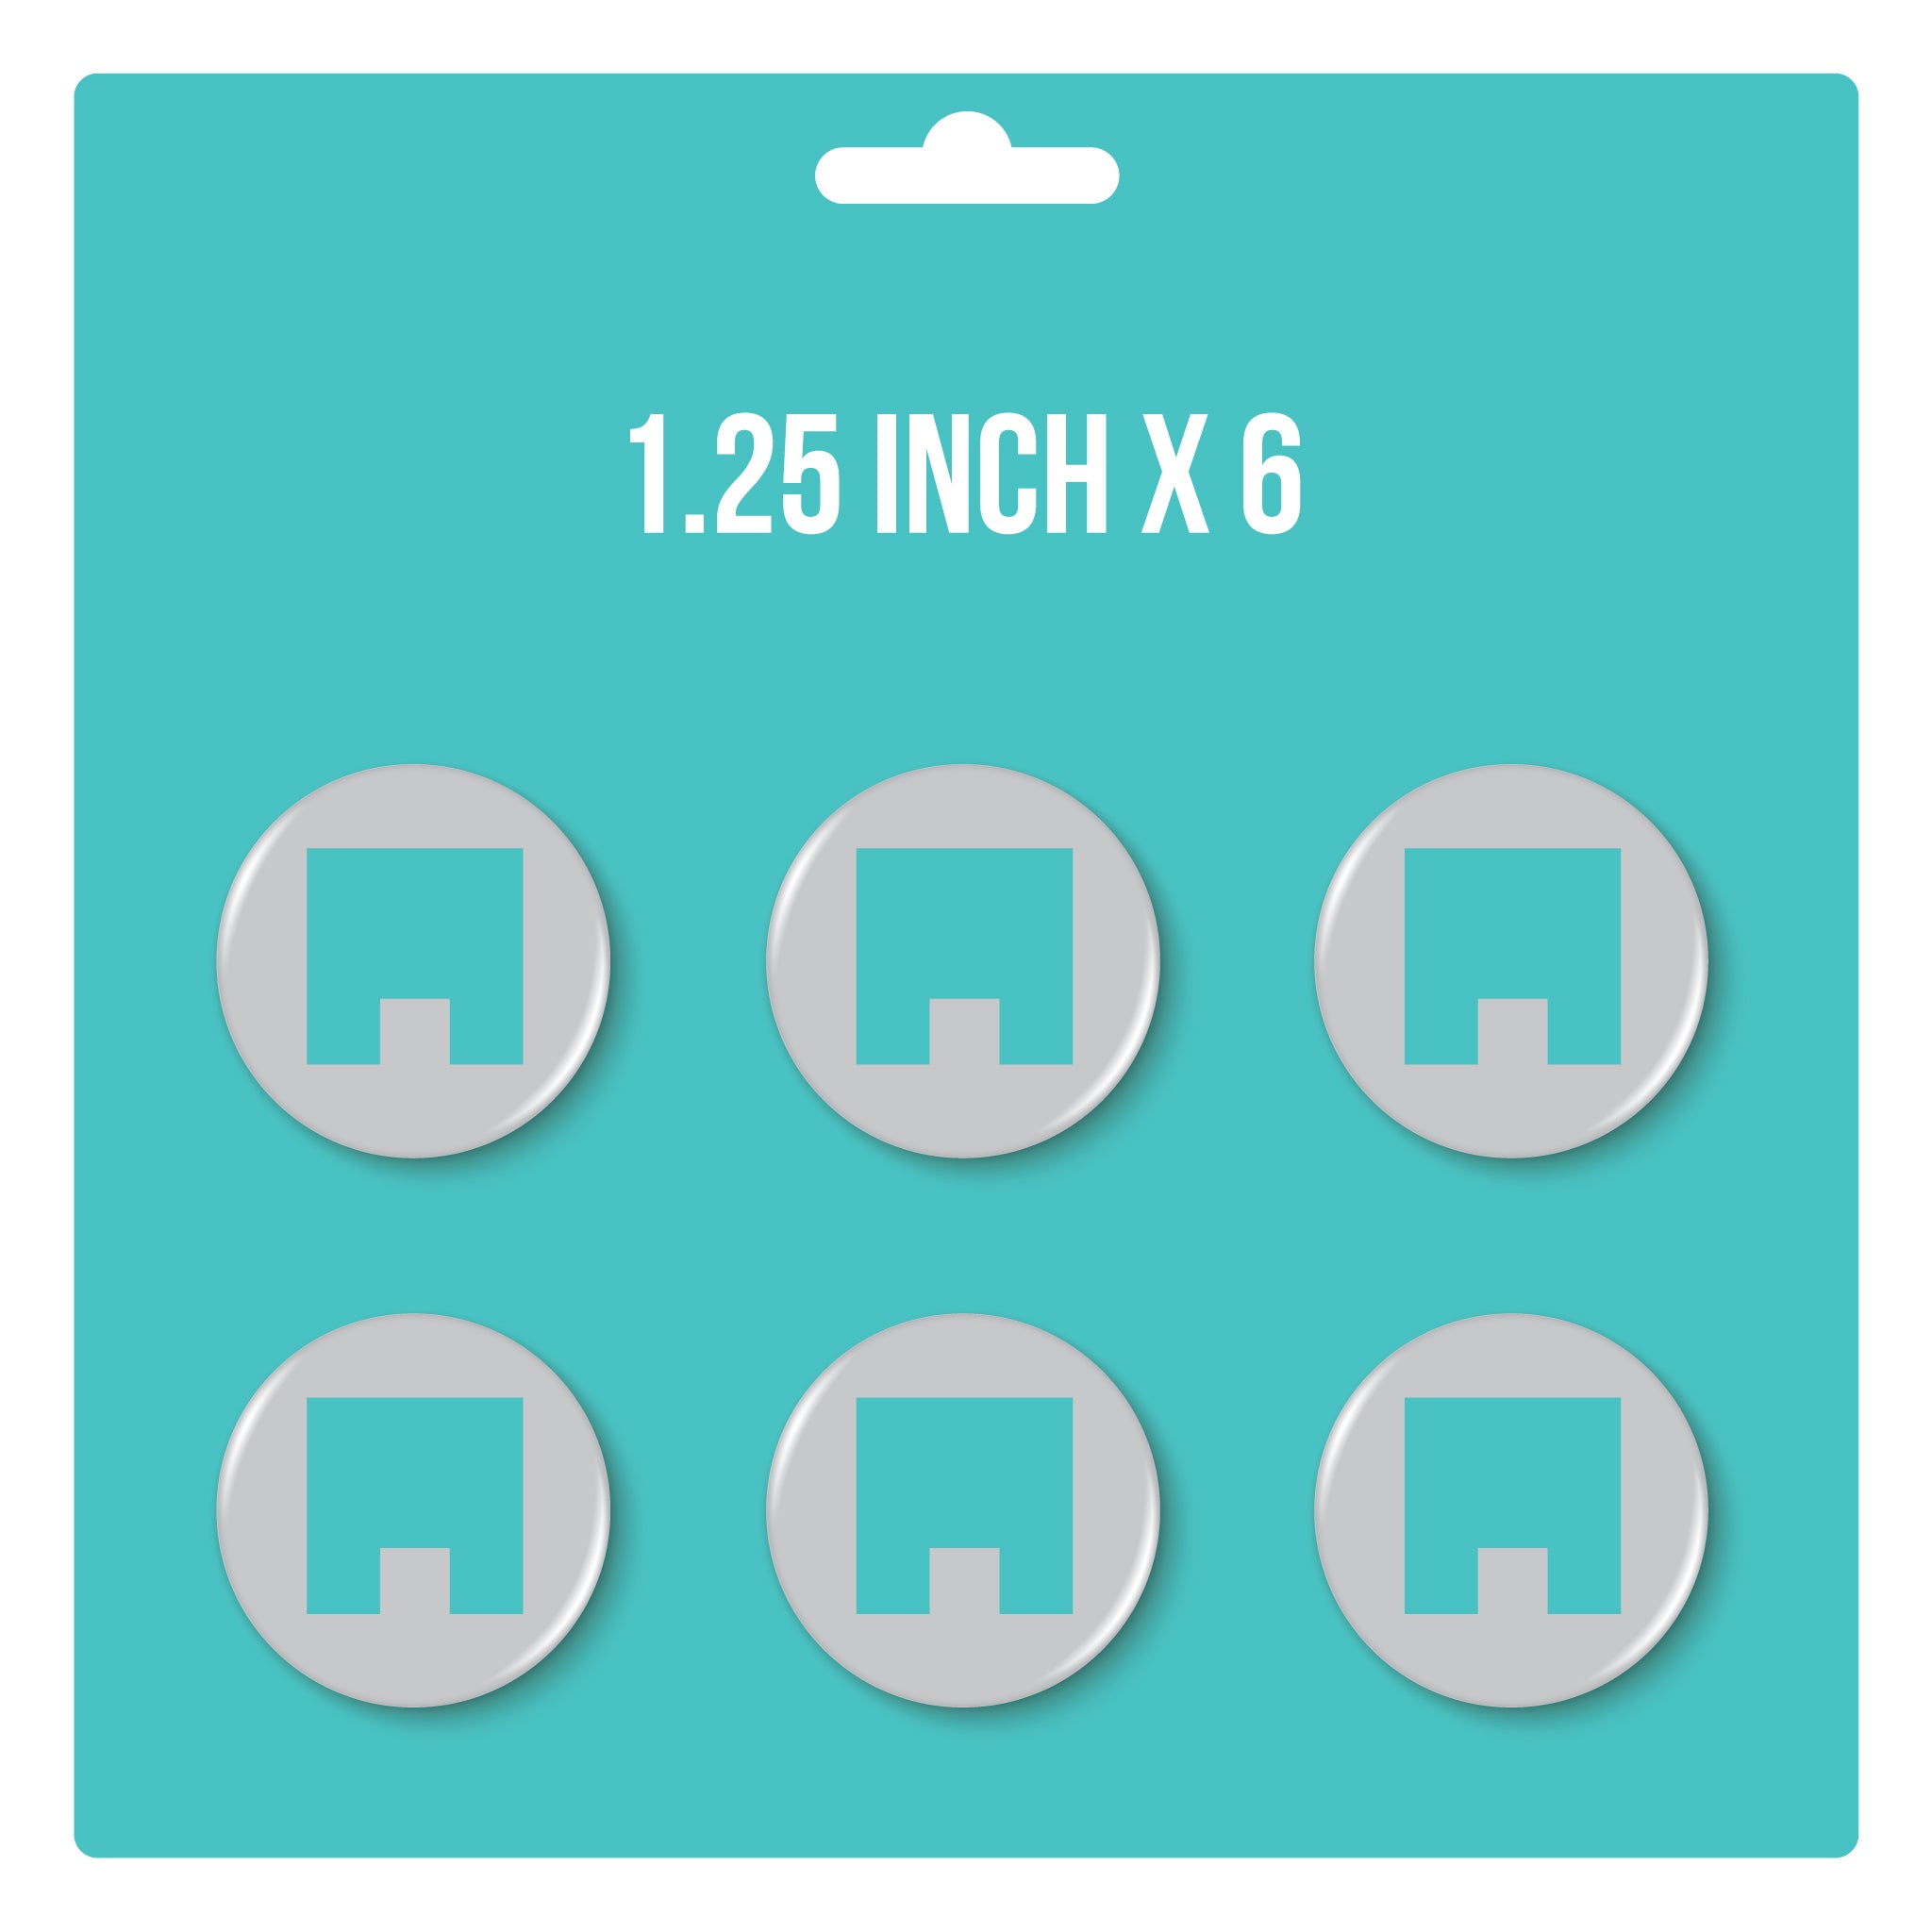 1.25" x 6 Button Pack